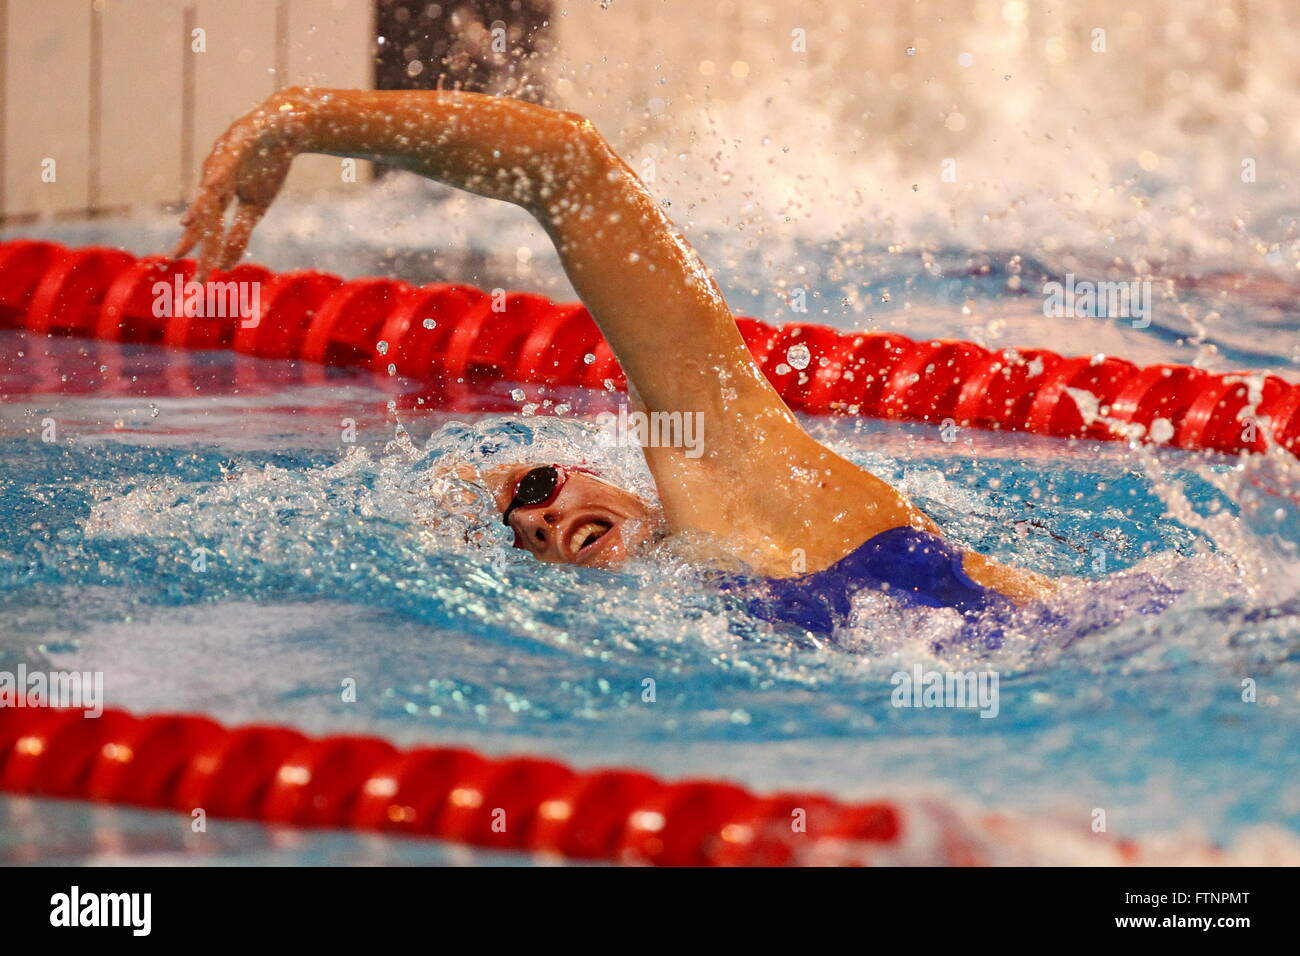 Aurélie Muller swimmer French champion France 1500 nl in Angers at the Jean Bouin pool November 19, 2016 Stock Photo